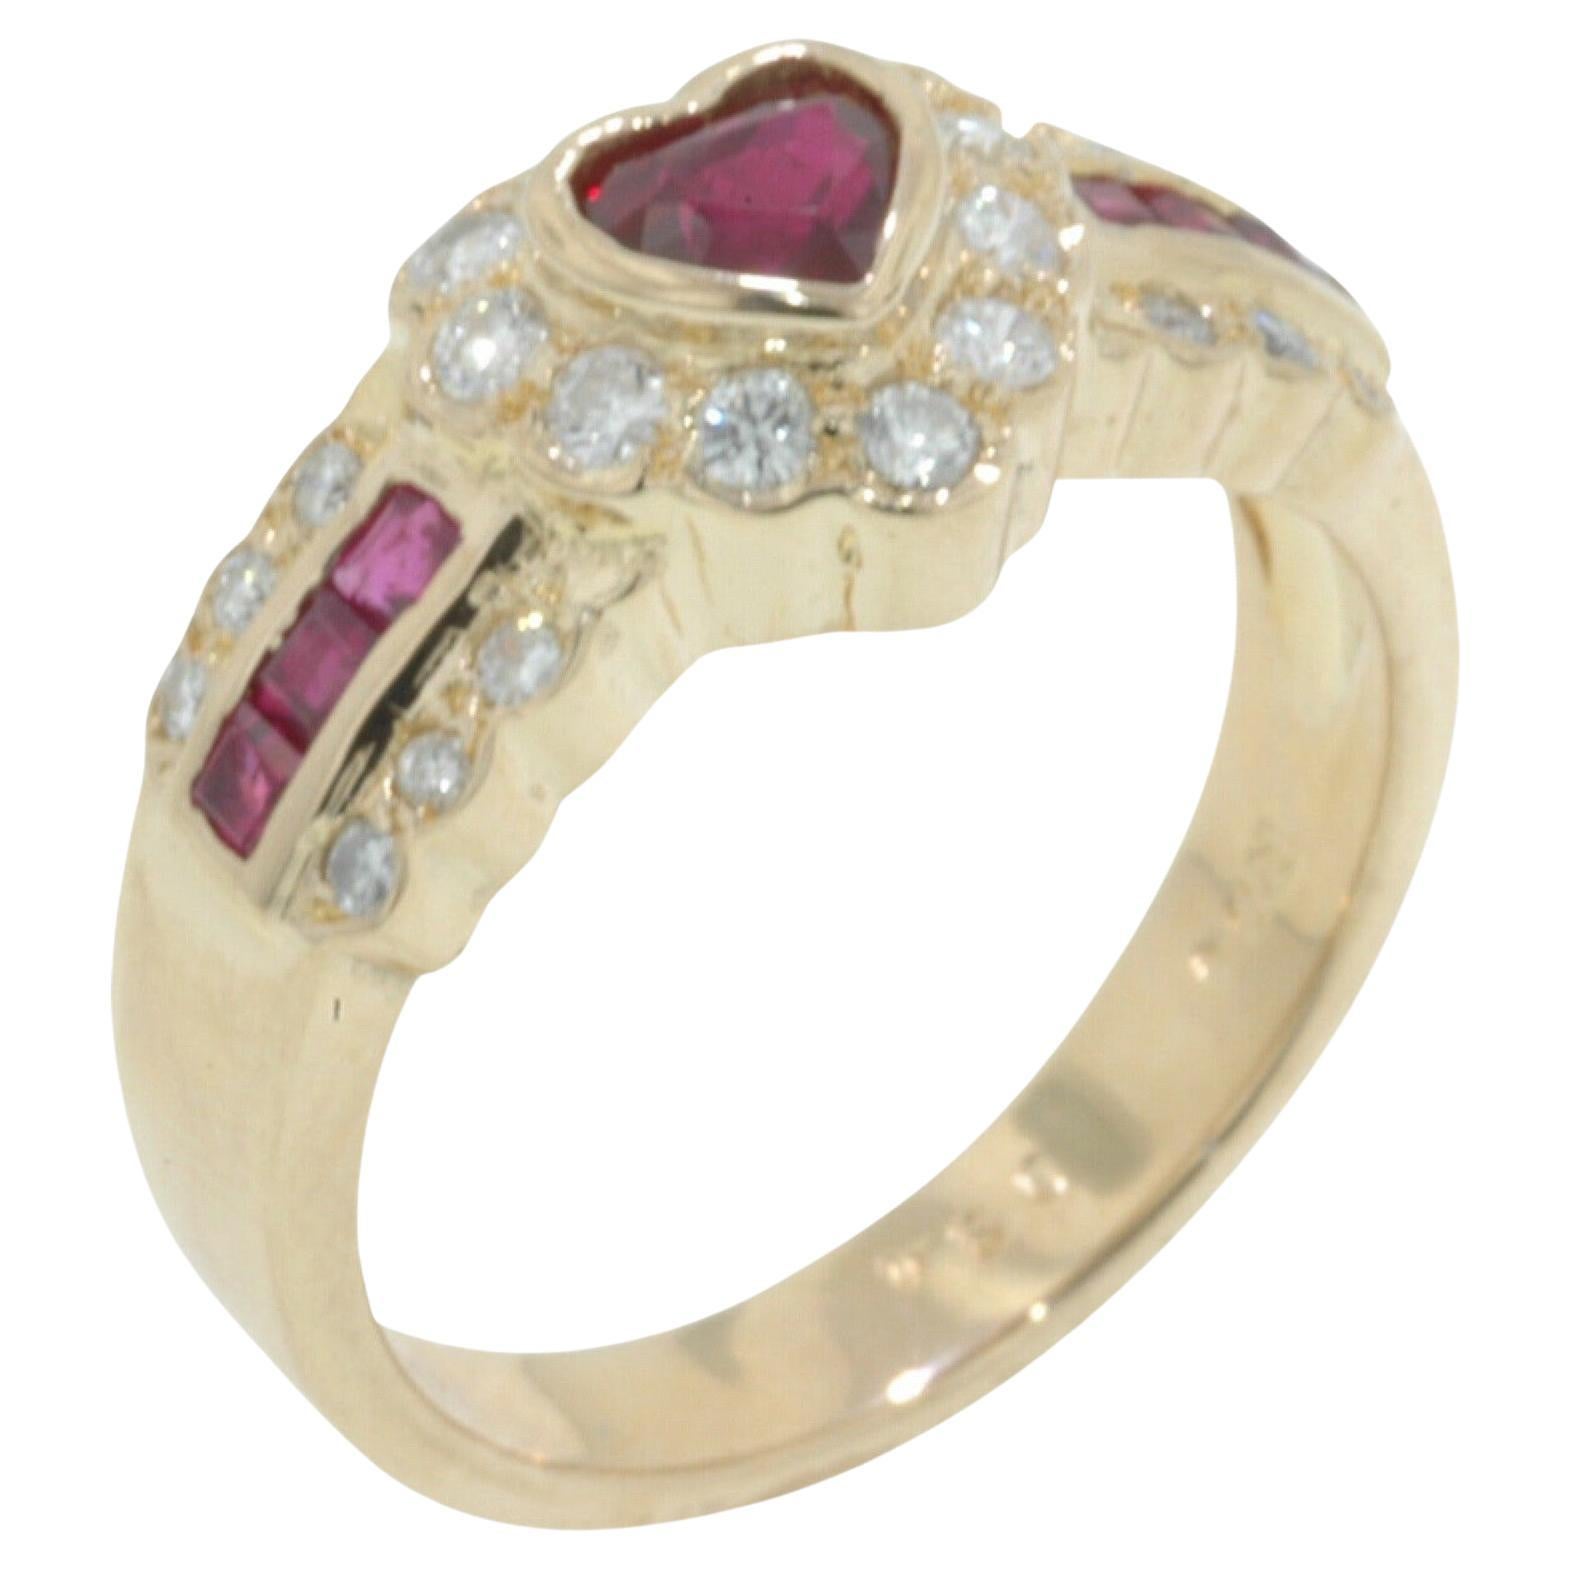 Bogo 18K Yellow Gold Heart Shaped Ruby and Diamonds Ring